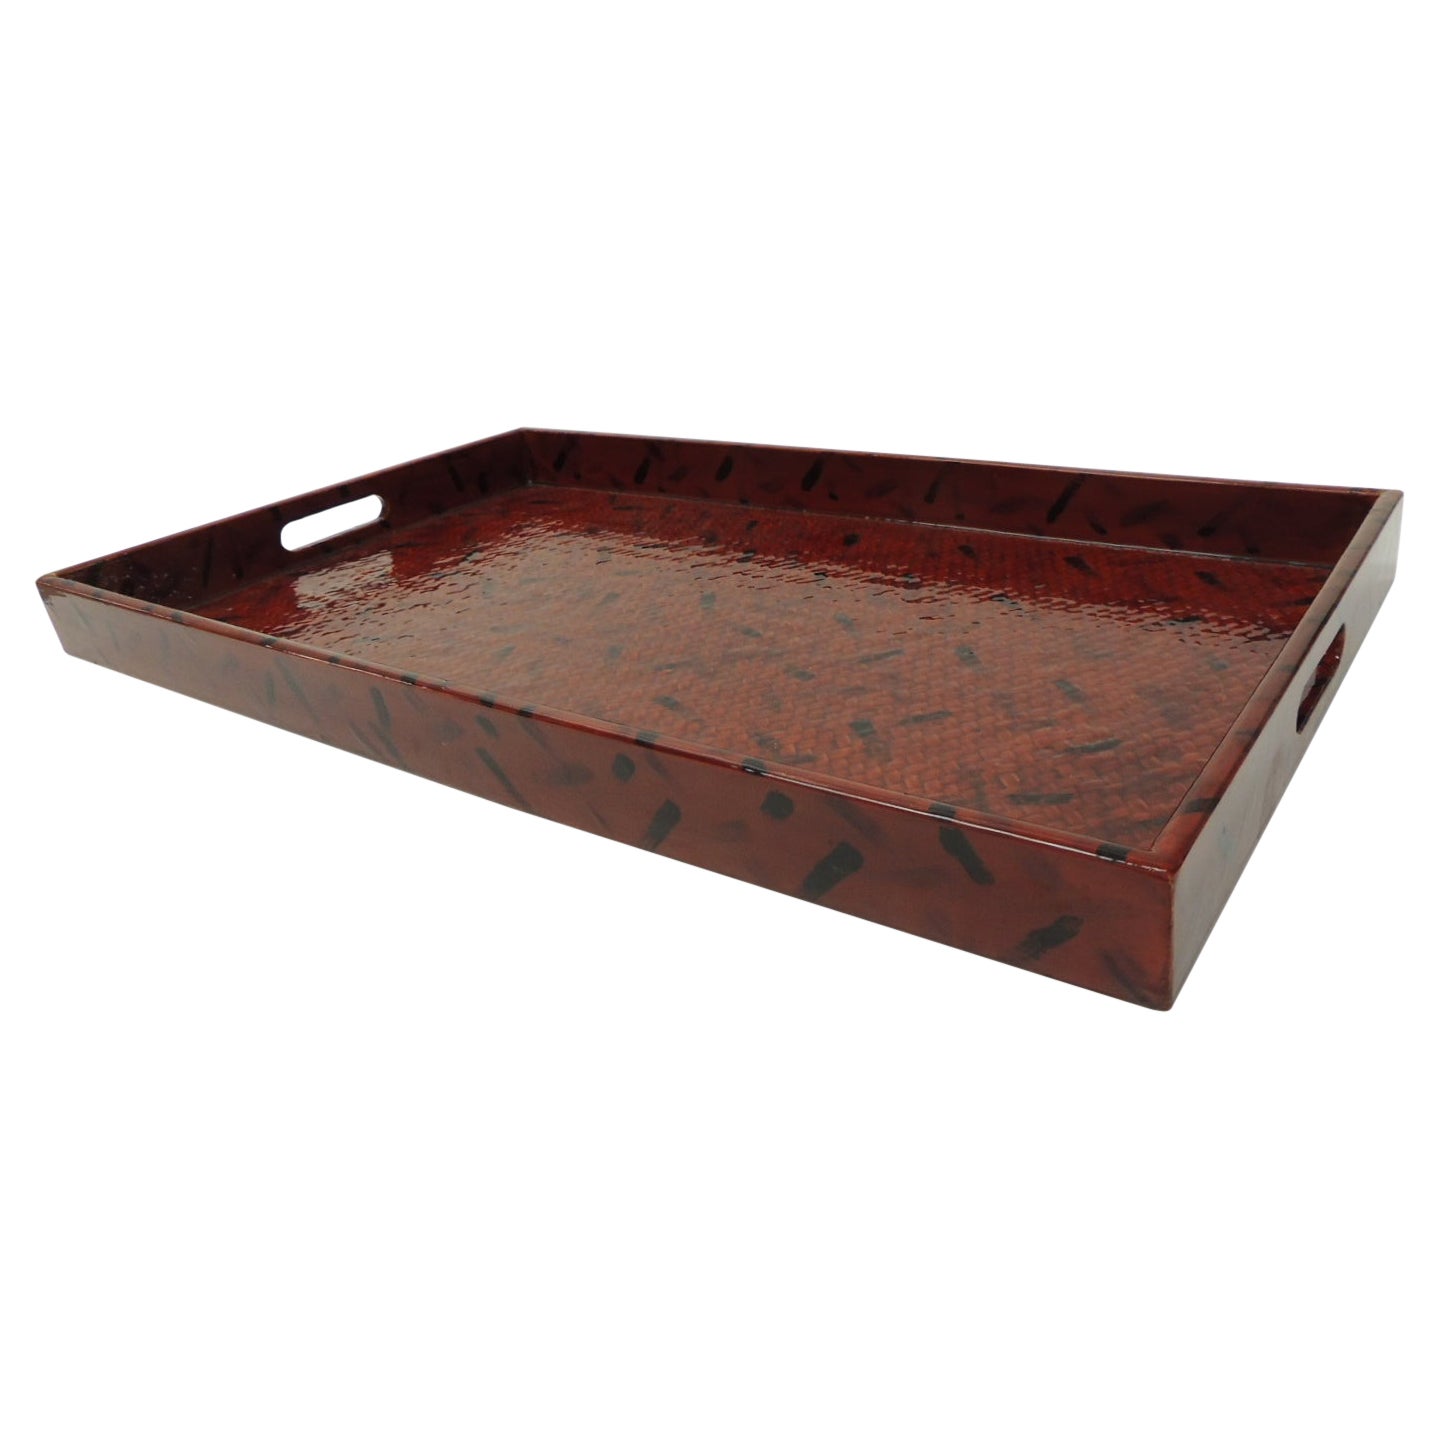 Vintage Rectangular Faux Tortoiseshell Red Lacquer Deco Tray 